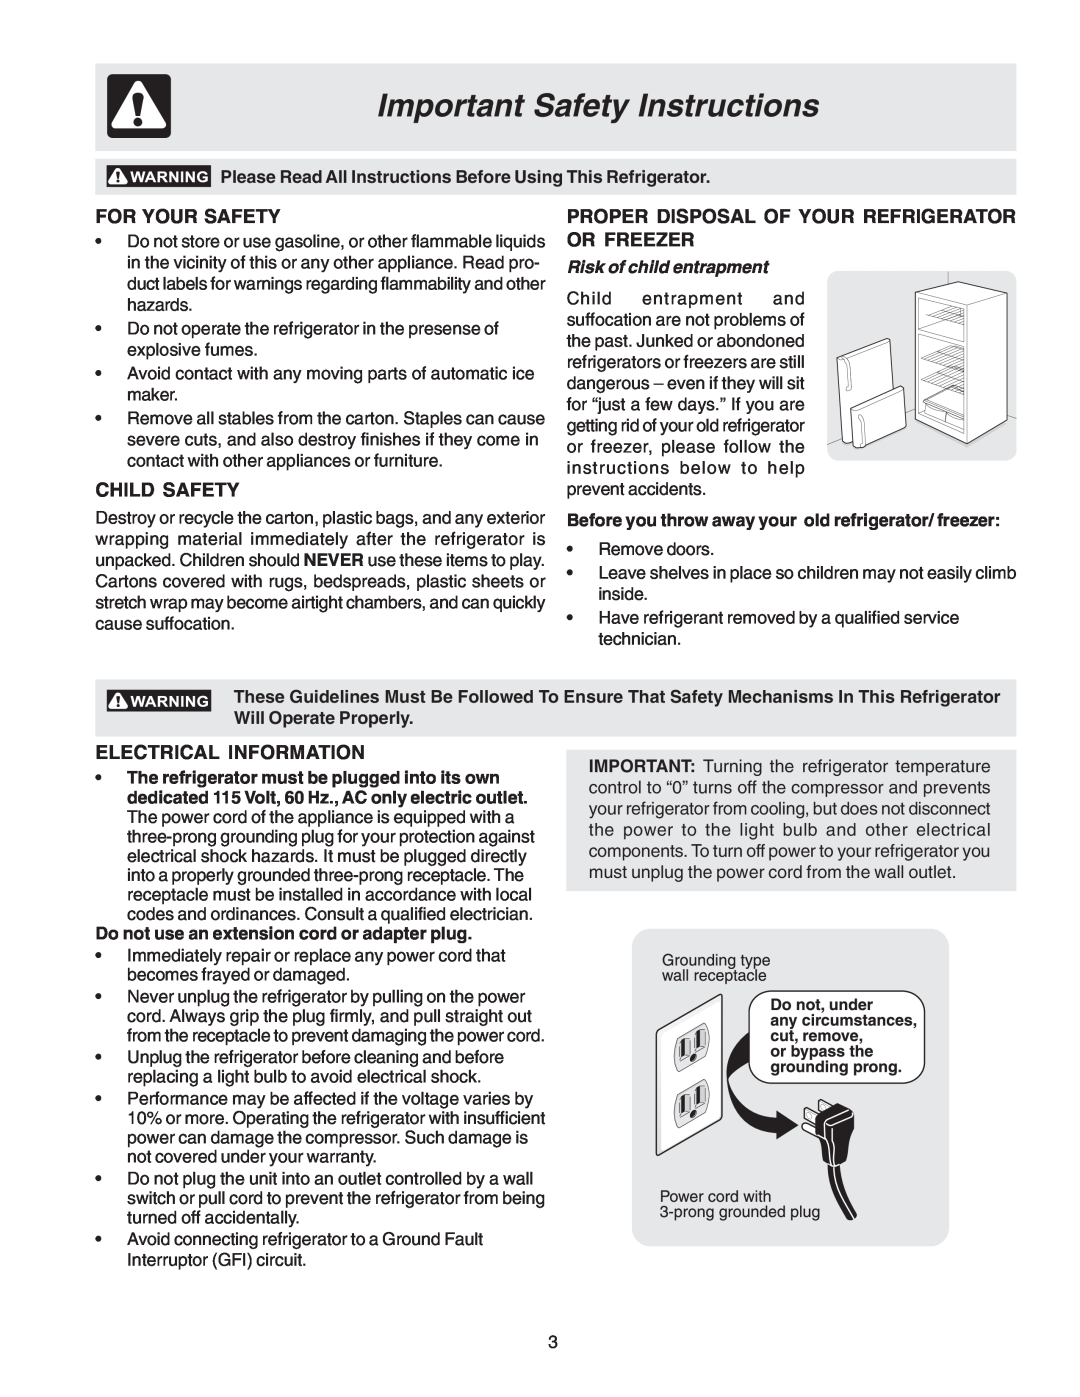 Electrolux - Gibson 240435505 manual Important Safety Instructions, For Your Safety, Child Safety, Electrical Information 